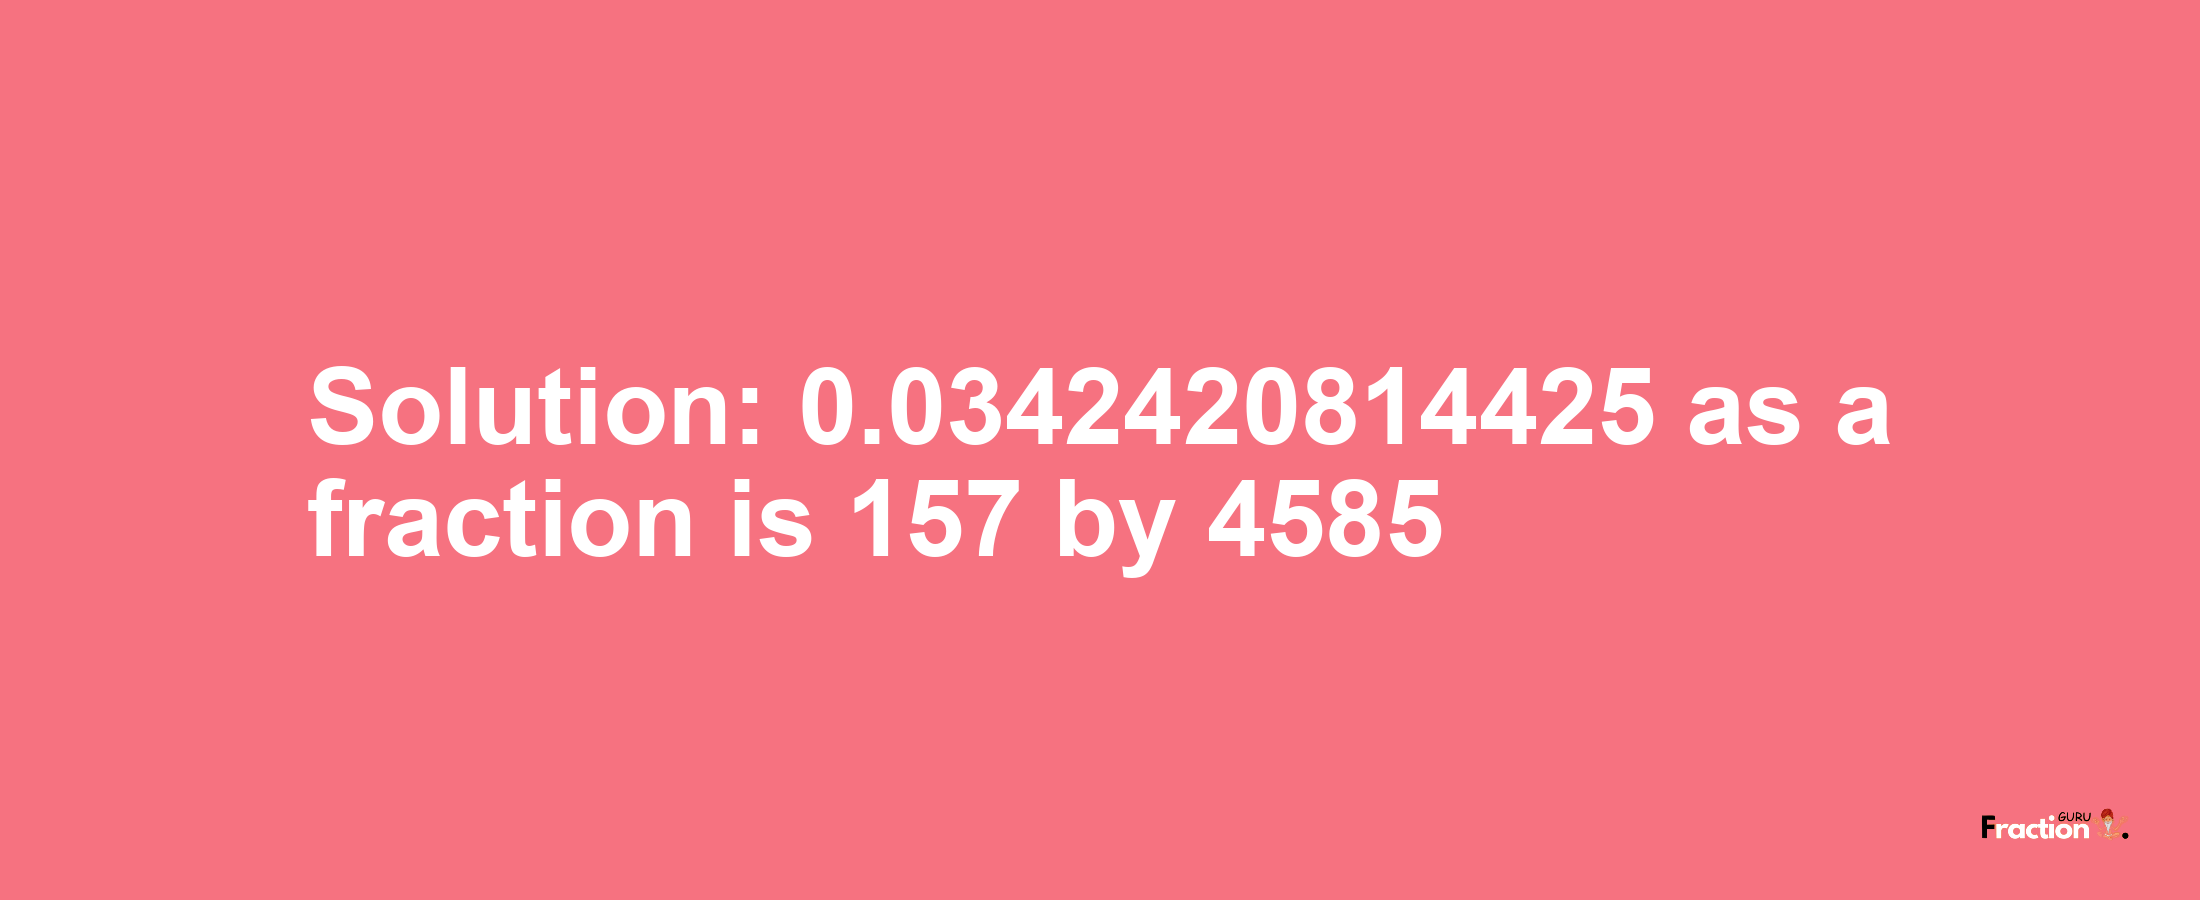 Solution:0.0342420814425 as a fraction is 157/4585